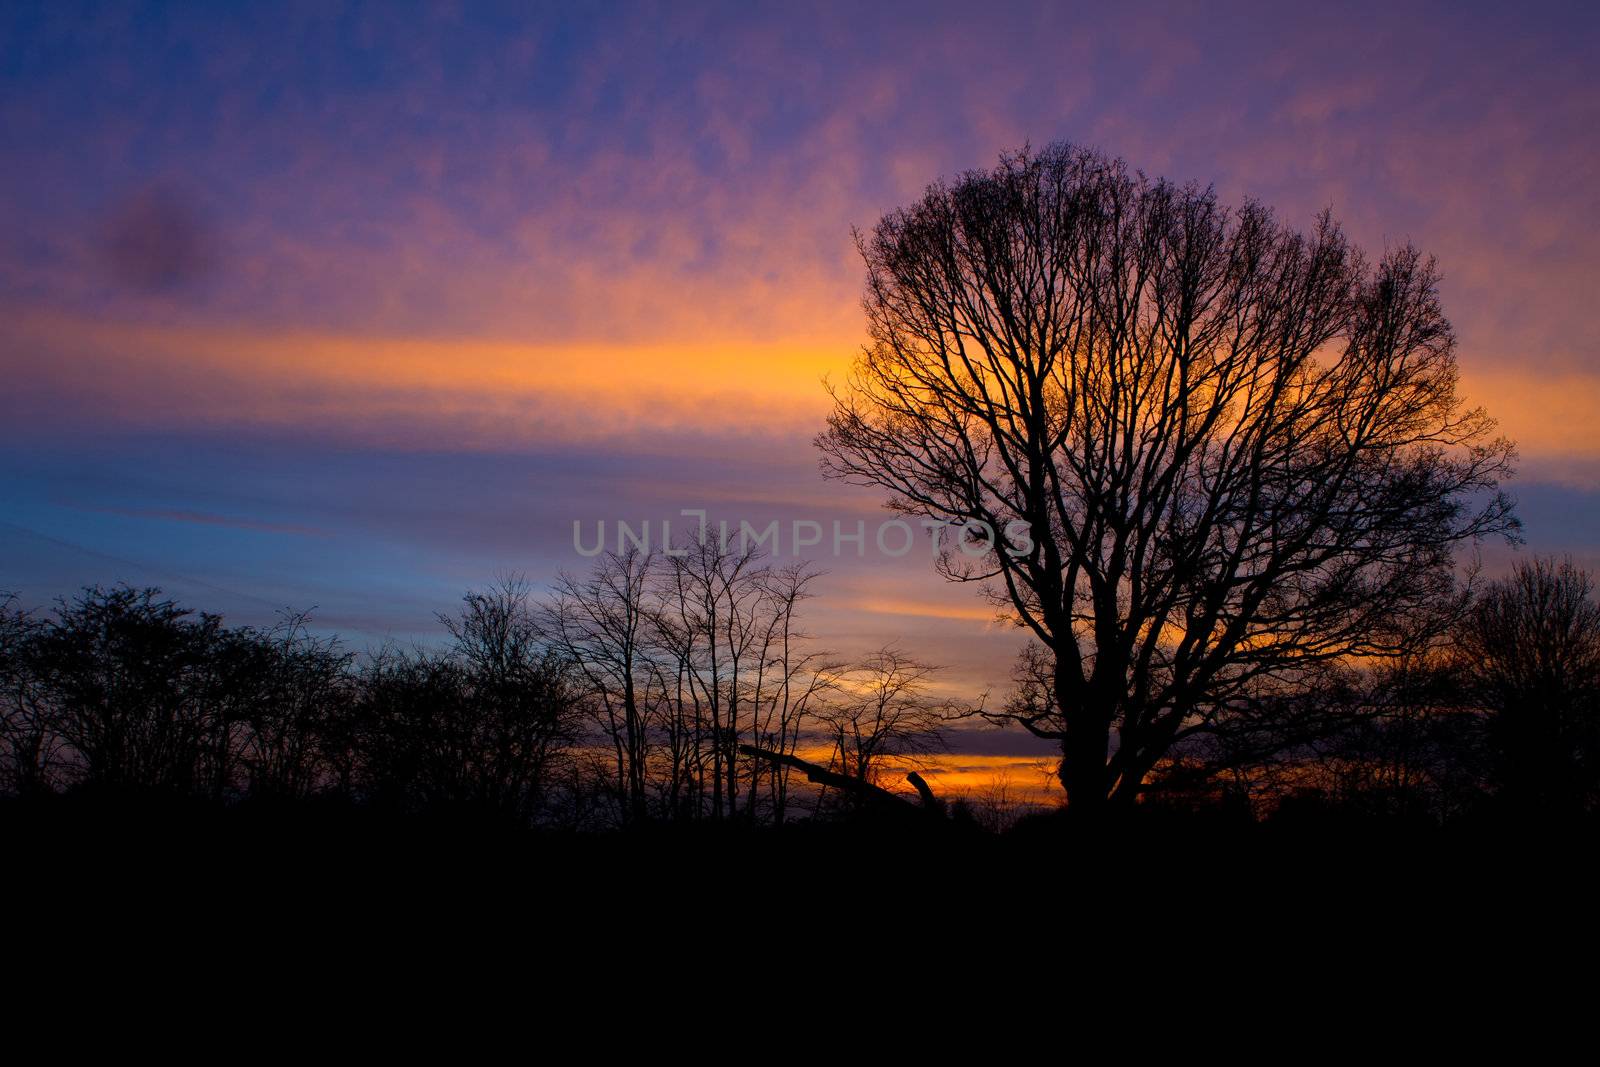 trees in a countryside scene at sunset by smikeymikey1